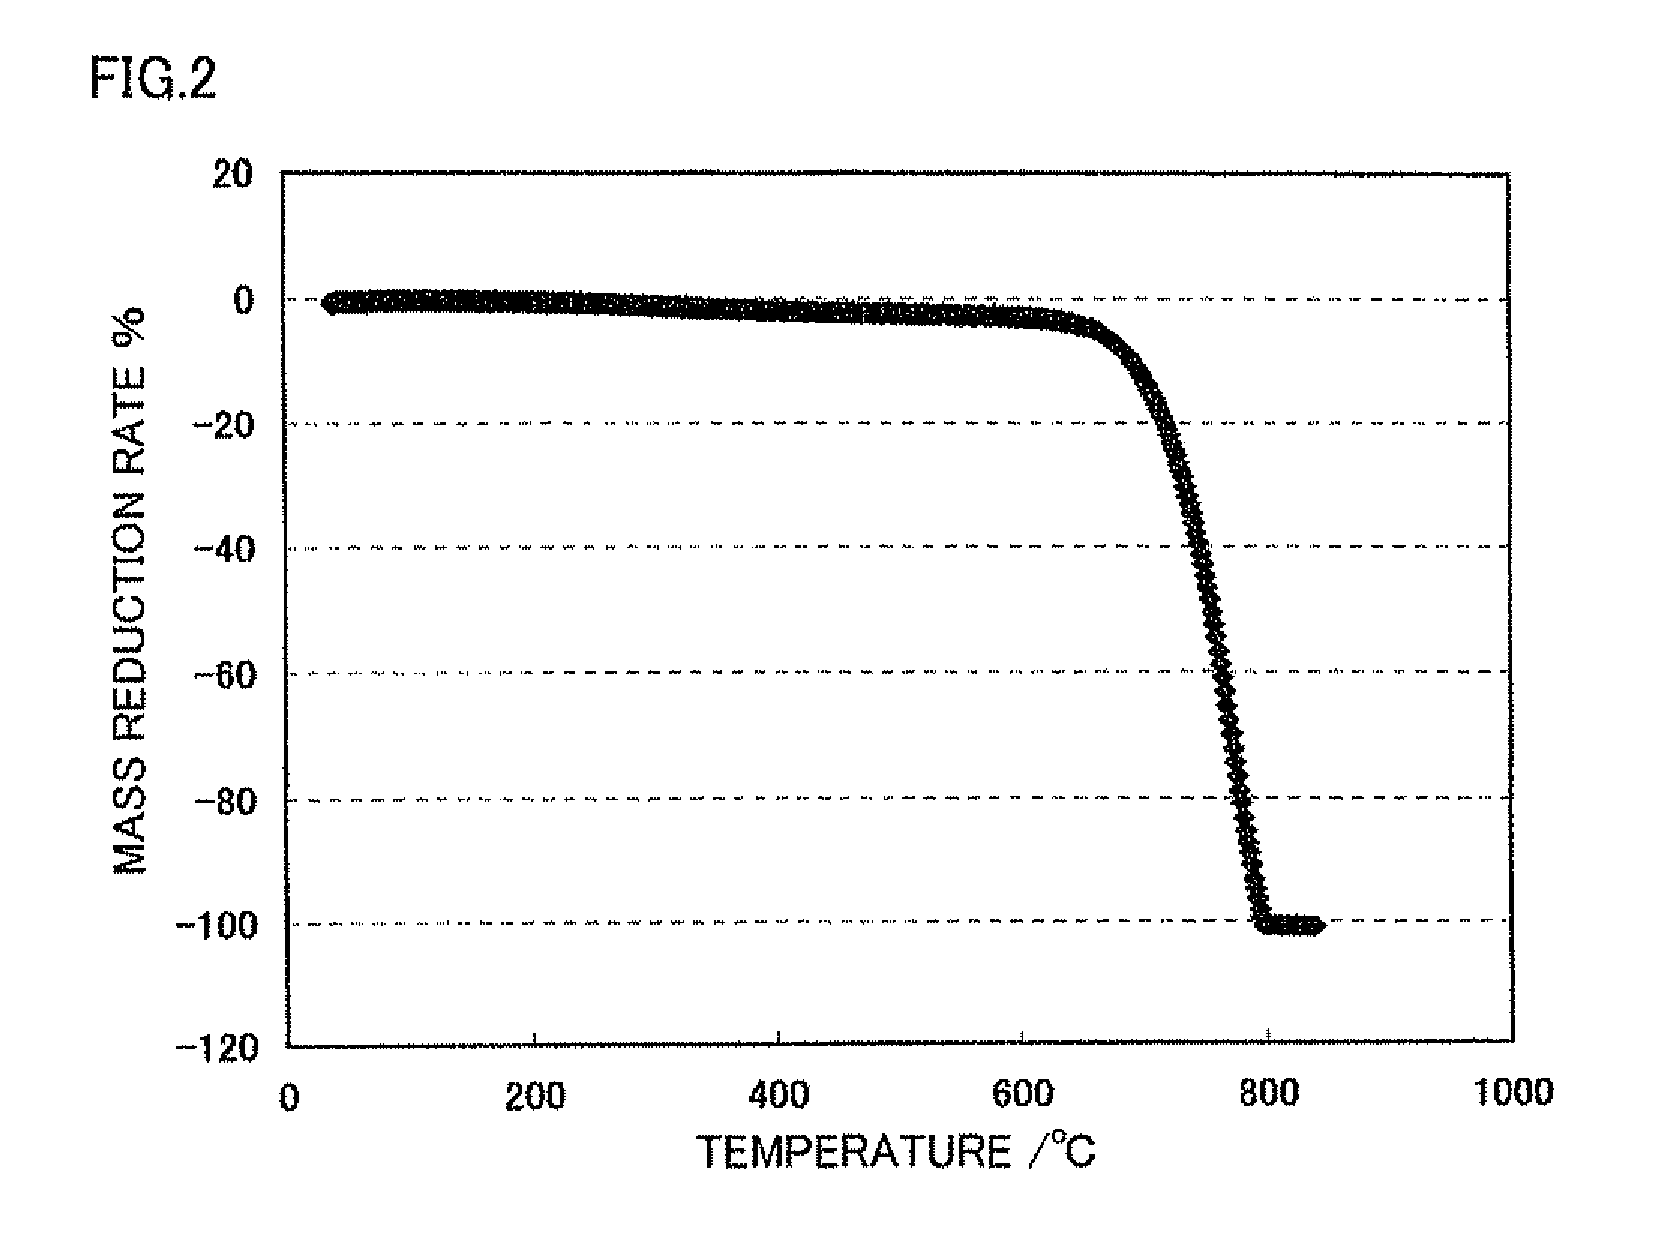 Carbon nanofiber, method for production thereof, method for production of carbon fiber composite material using carbon nanofiber, and carbon fiber composite material